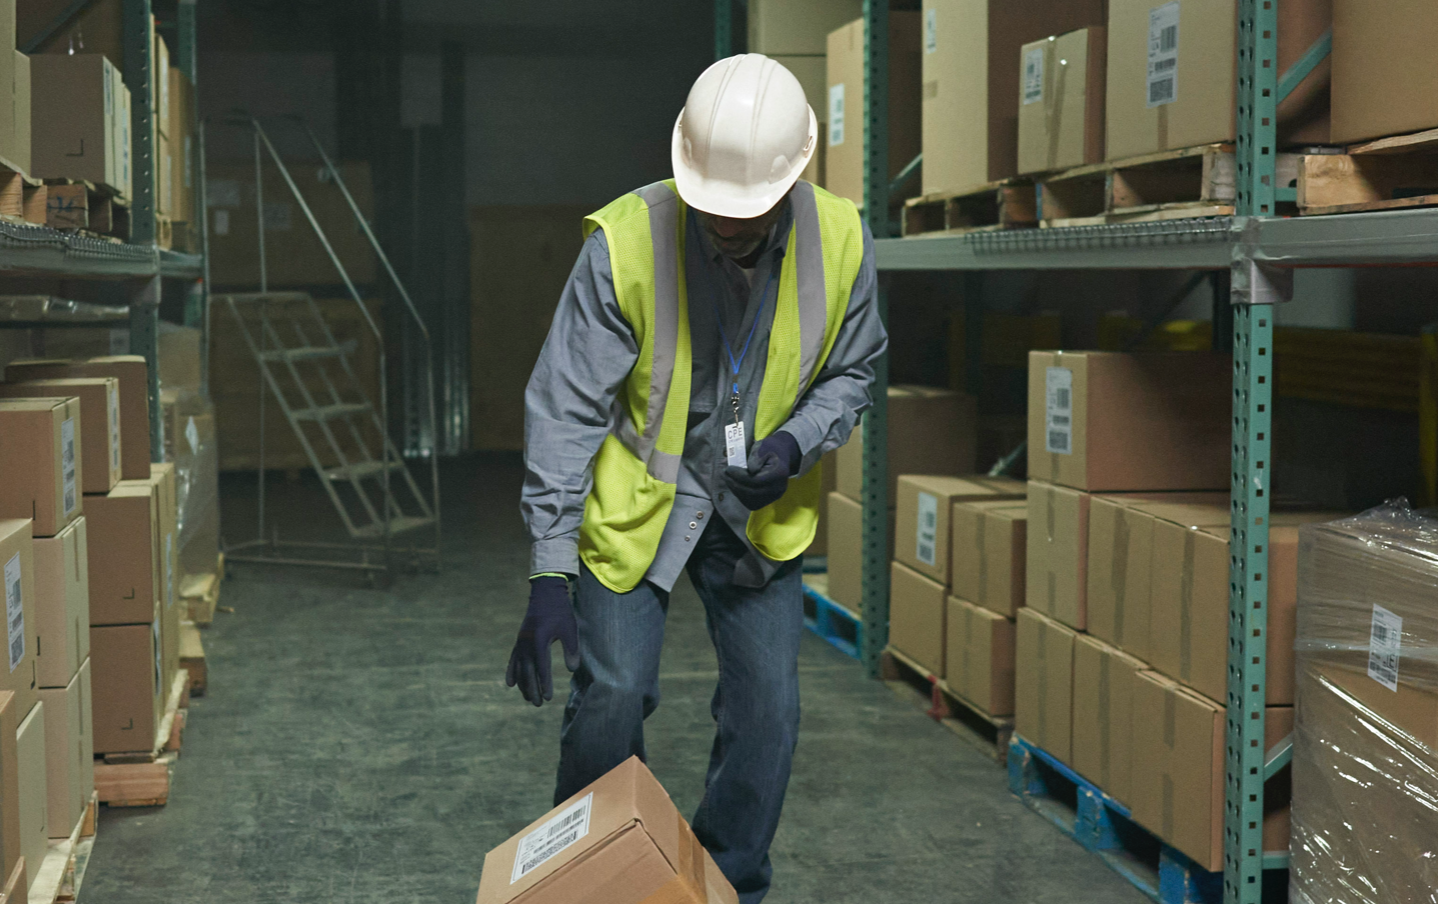 A man carrying a box in a warehouse.